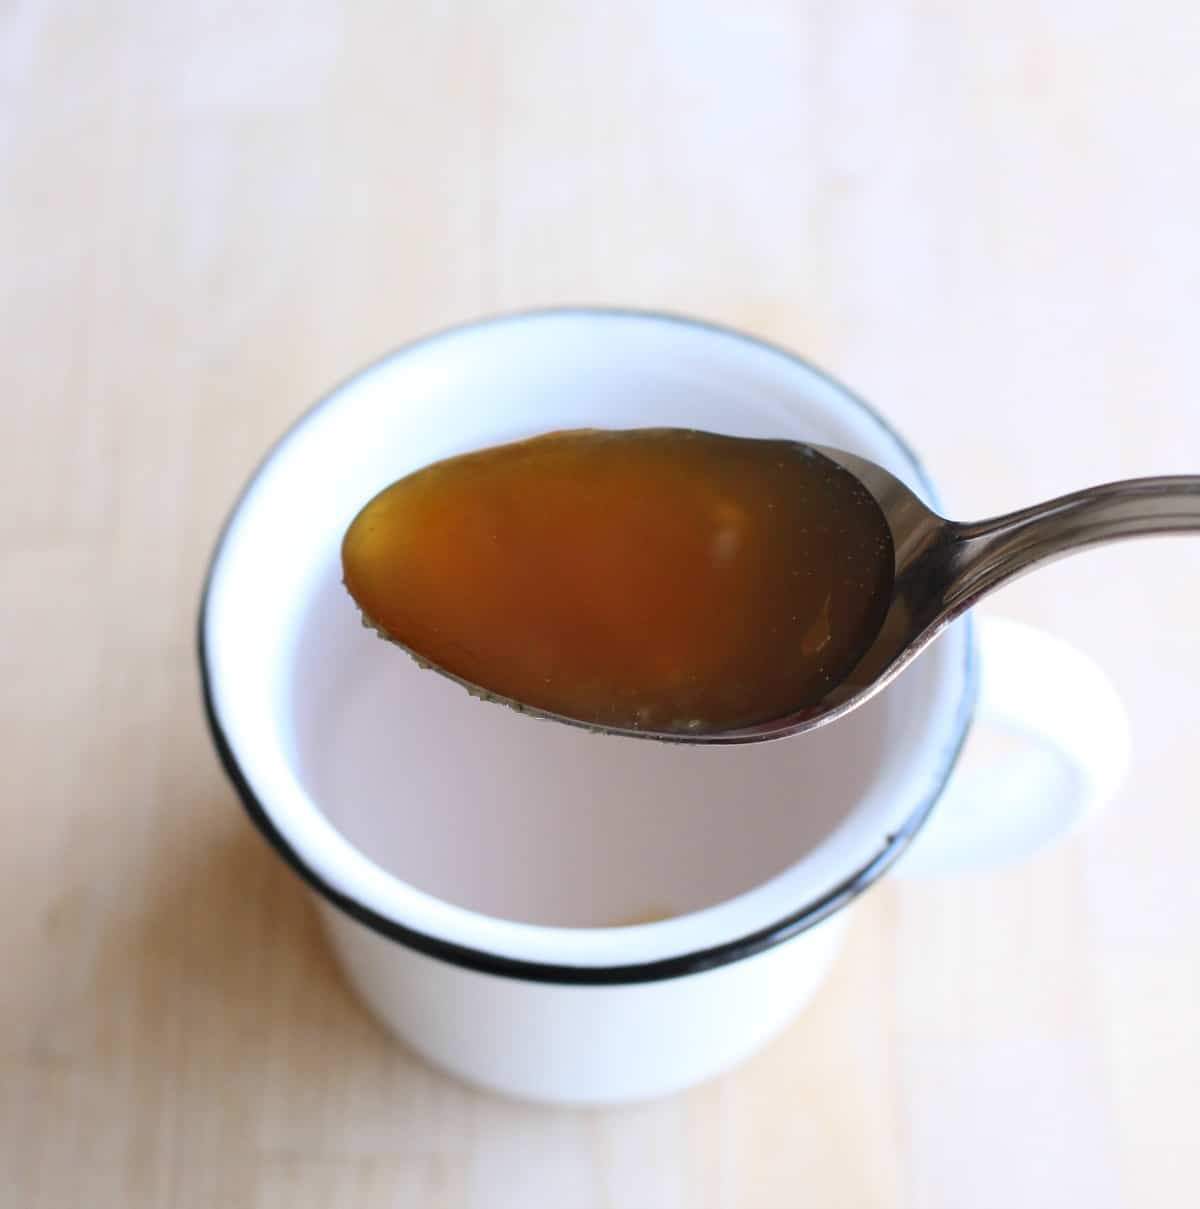 A spoon with honey over a white cup.